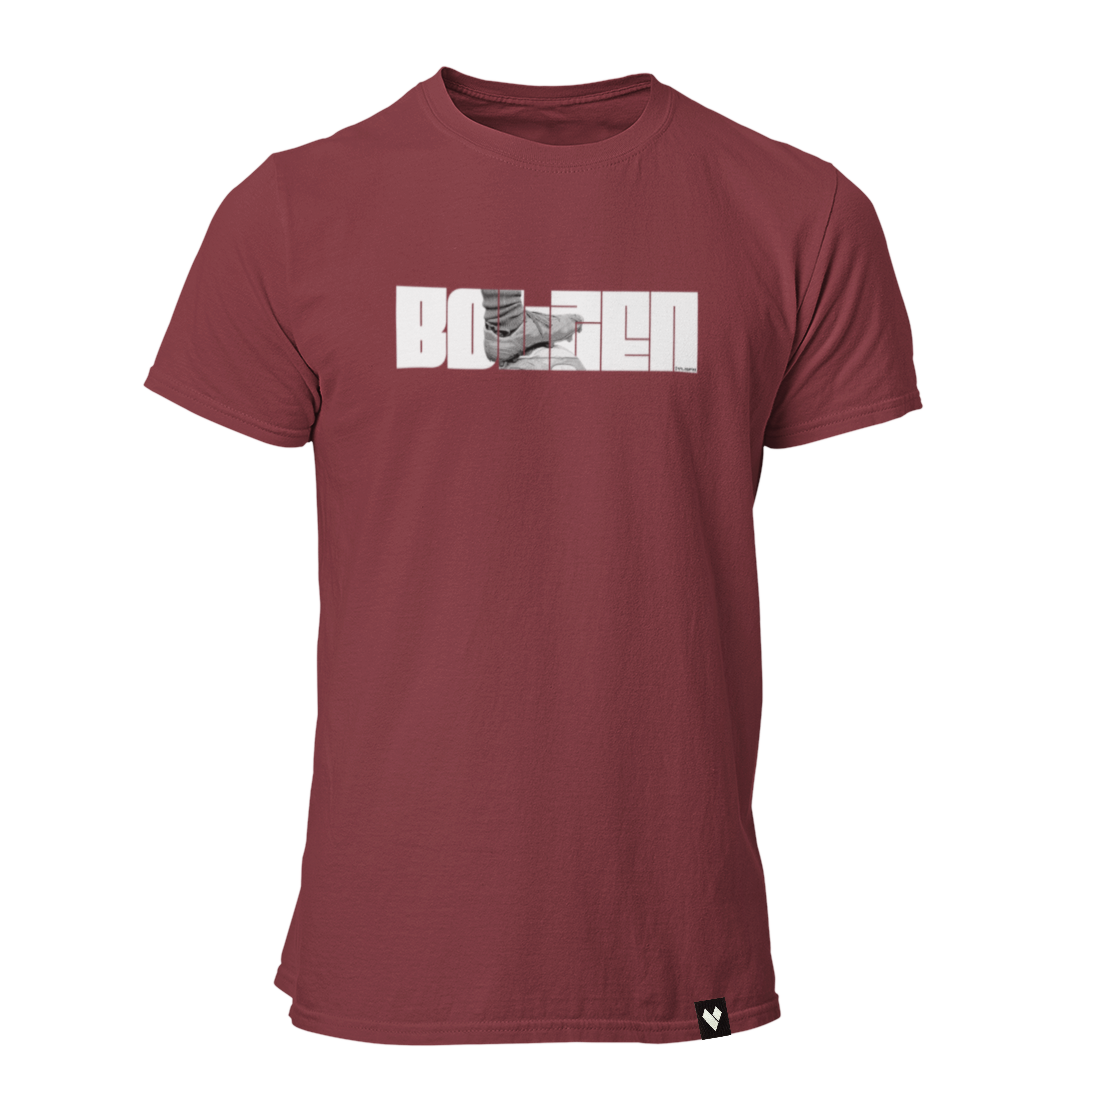 mockup-of-a-ghosted-men-s-t-shirt-in-front-view-29349 - 2021-03-16T122058.169.png